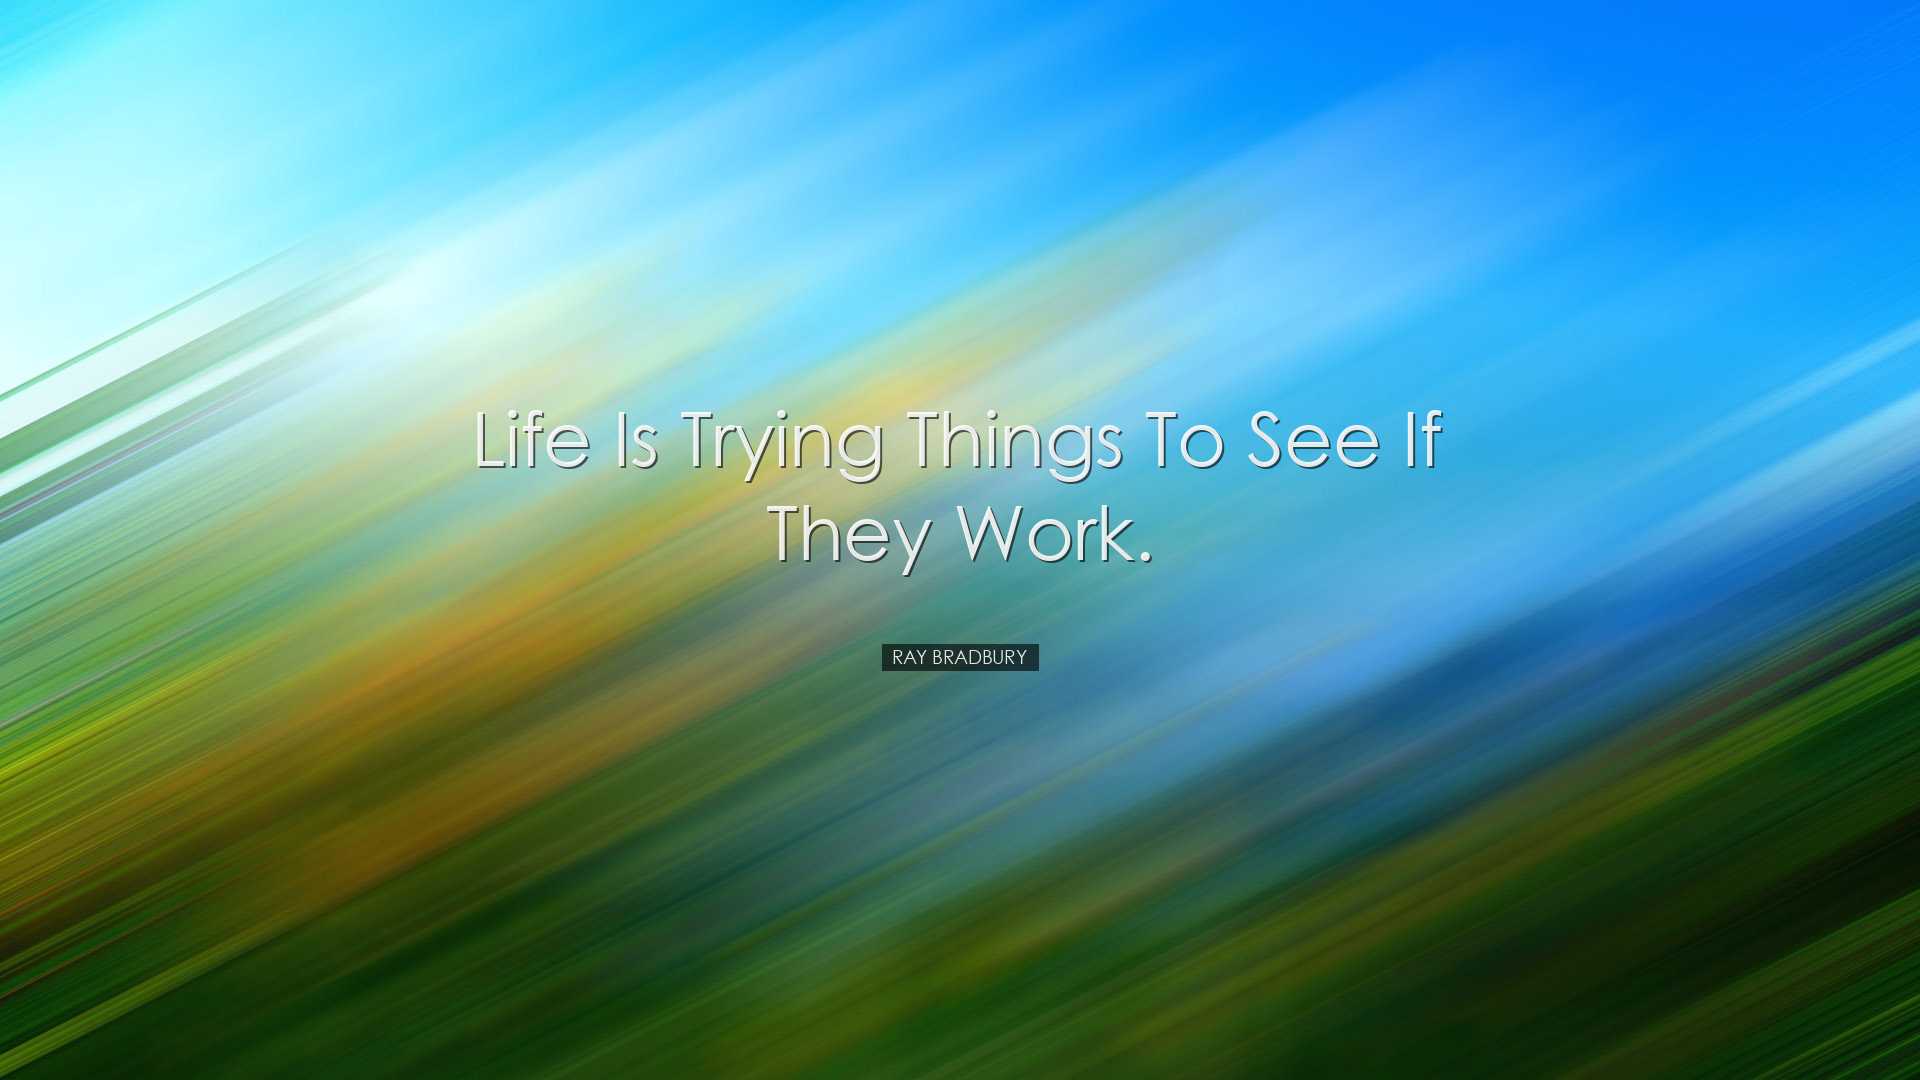 Life is trying things to see if they work. - Ray Bradbury